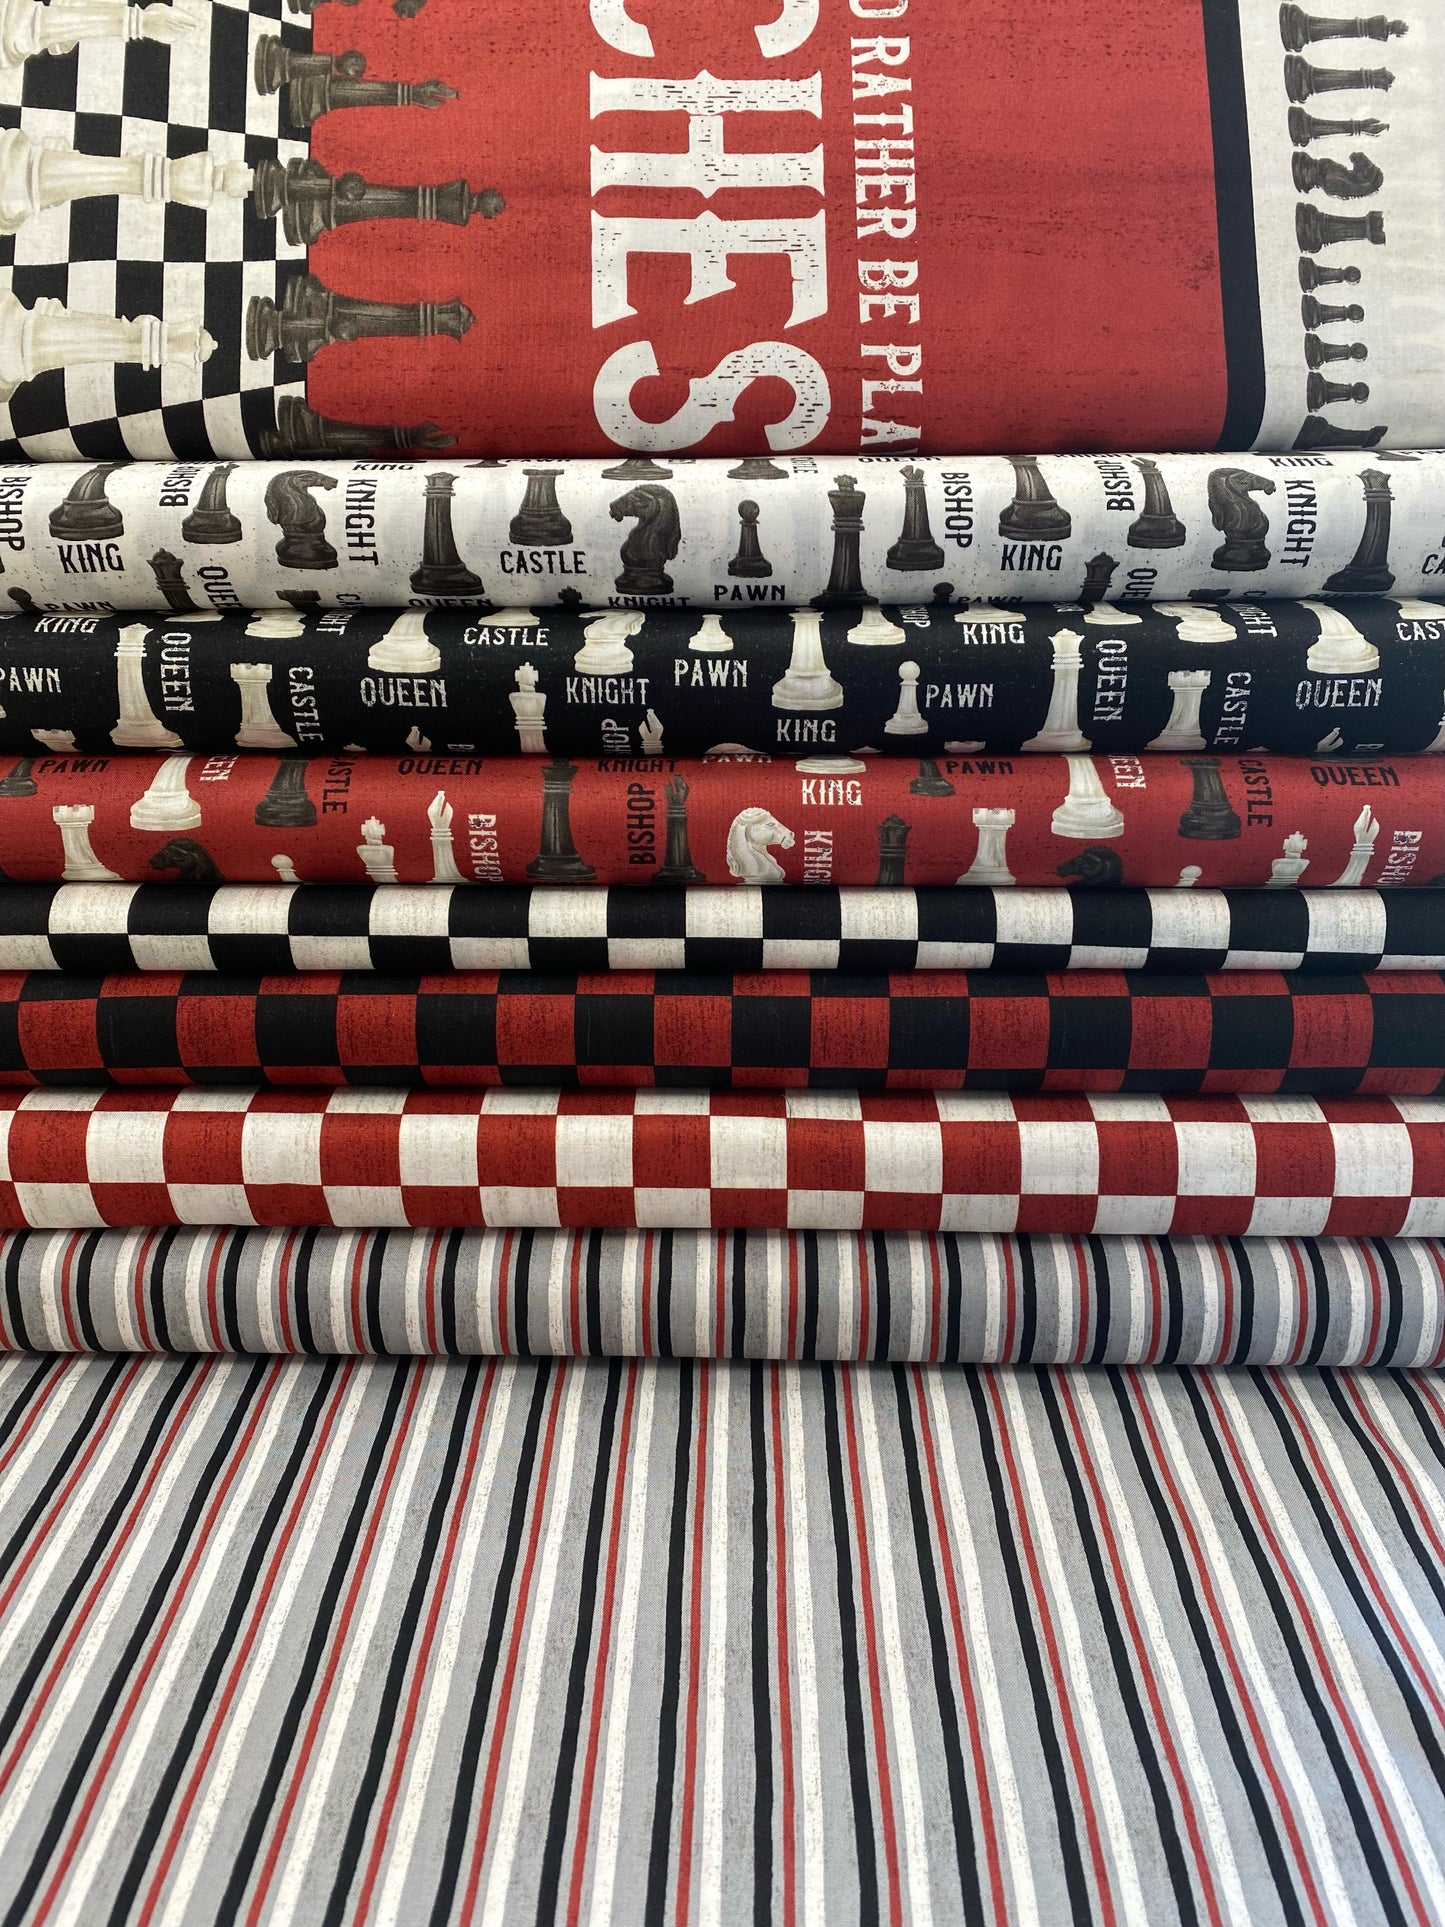 I'd Rather Be Playing Chess by Tara Reed Checkerboard Black/Red     C11261-BLACKRED Cotton Woven Fabric